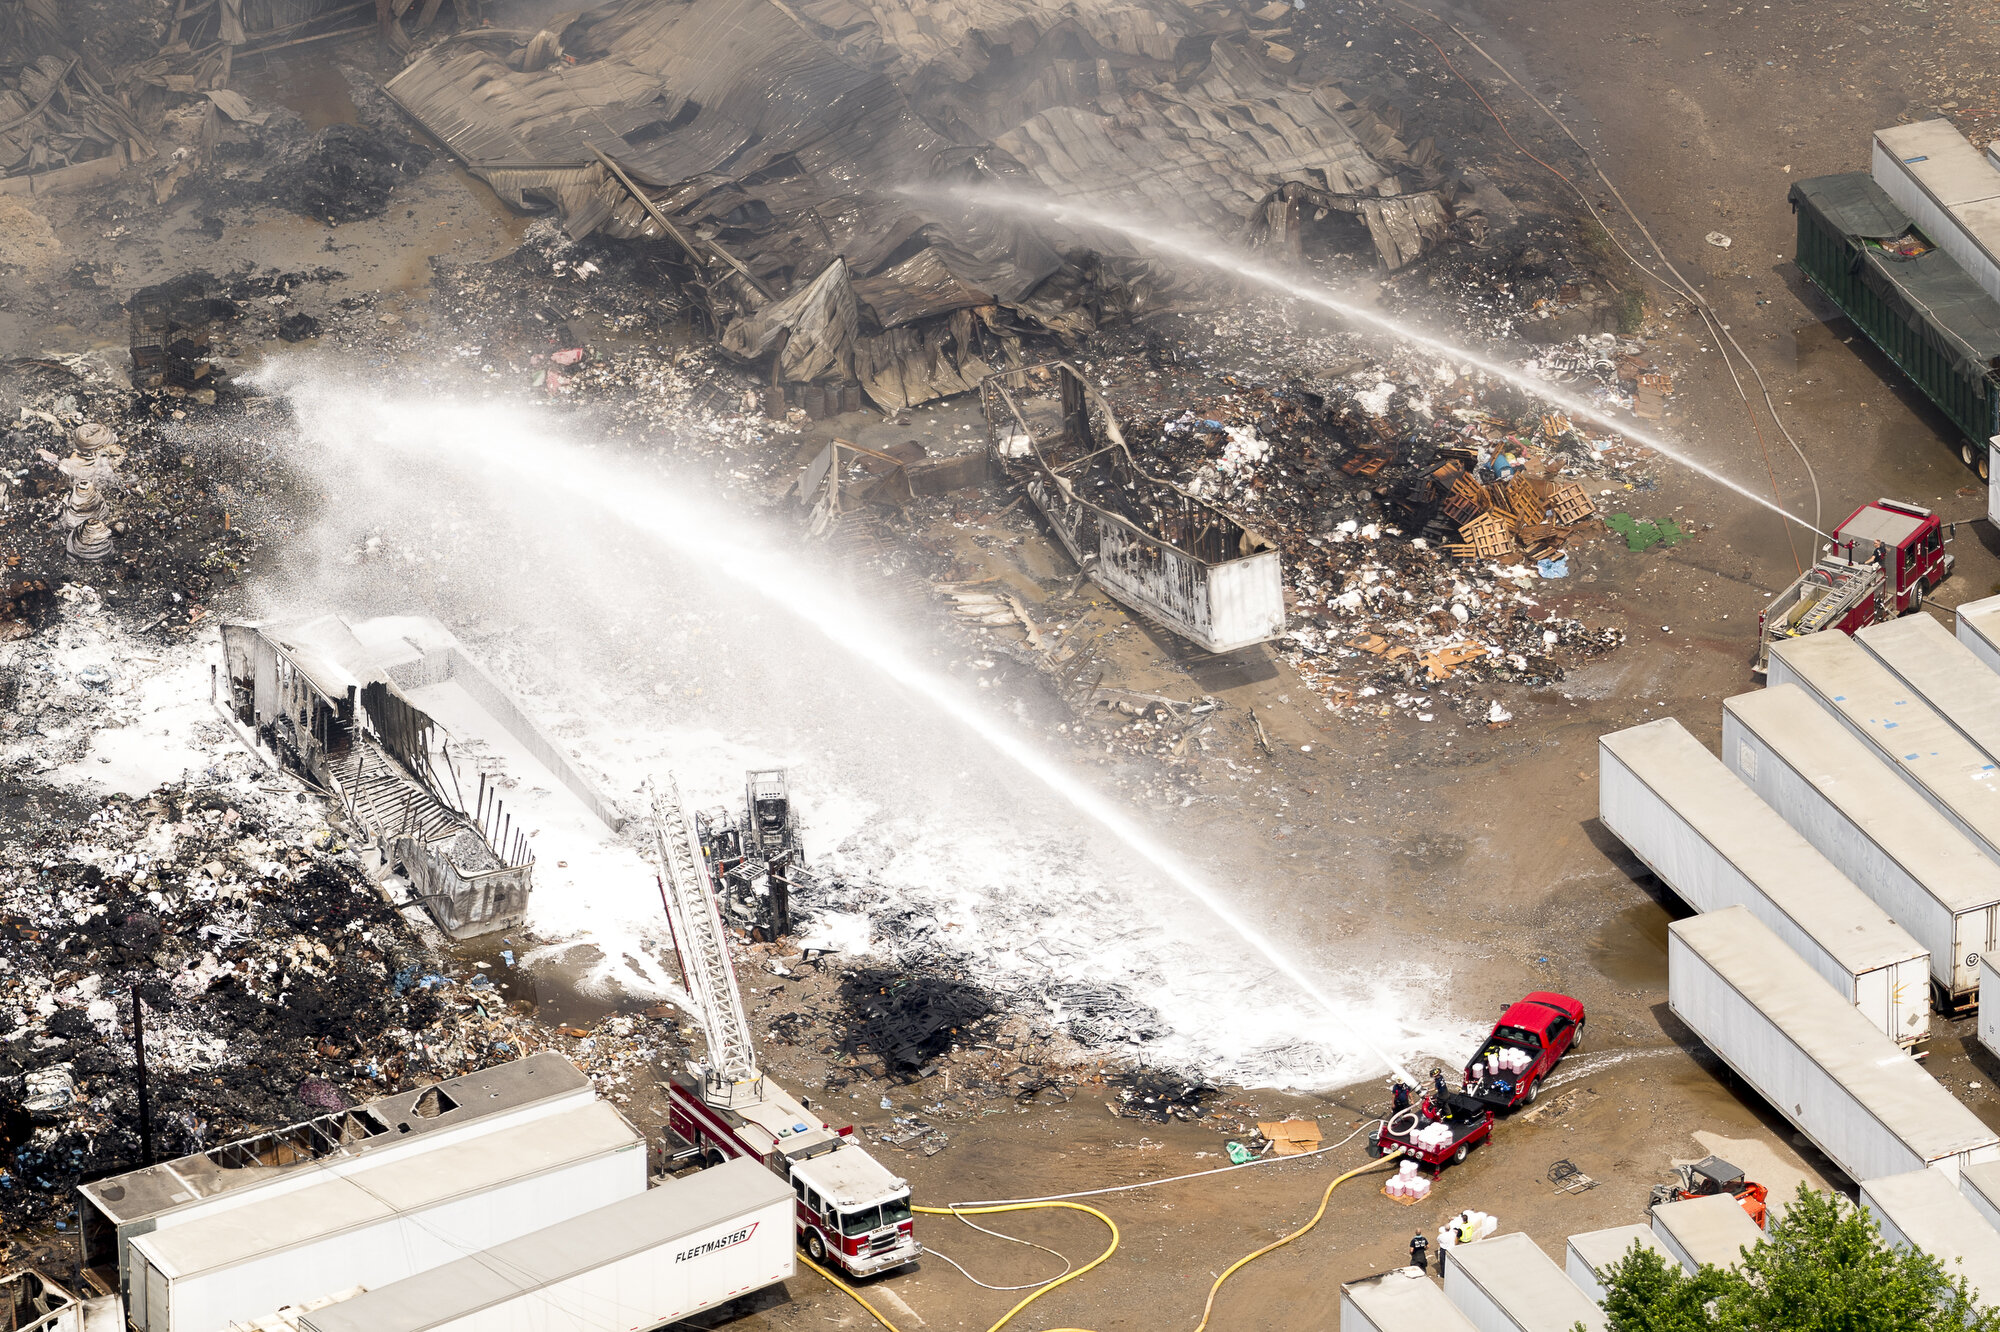  Firefighters spray a fire retardant foam onto a fire at Fort Loudon Waste &amp; Recycling as seen in this aerial photograph taken from an airplane in Knoxville. 